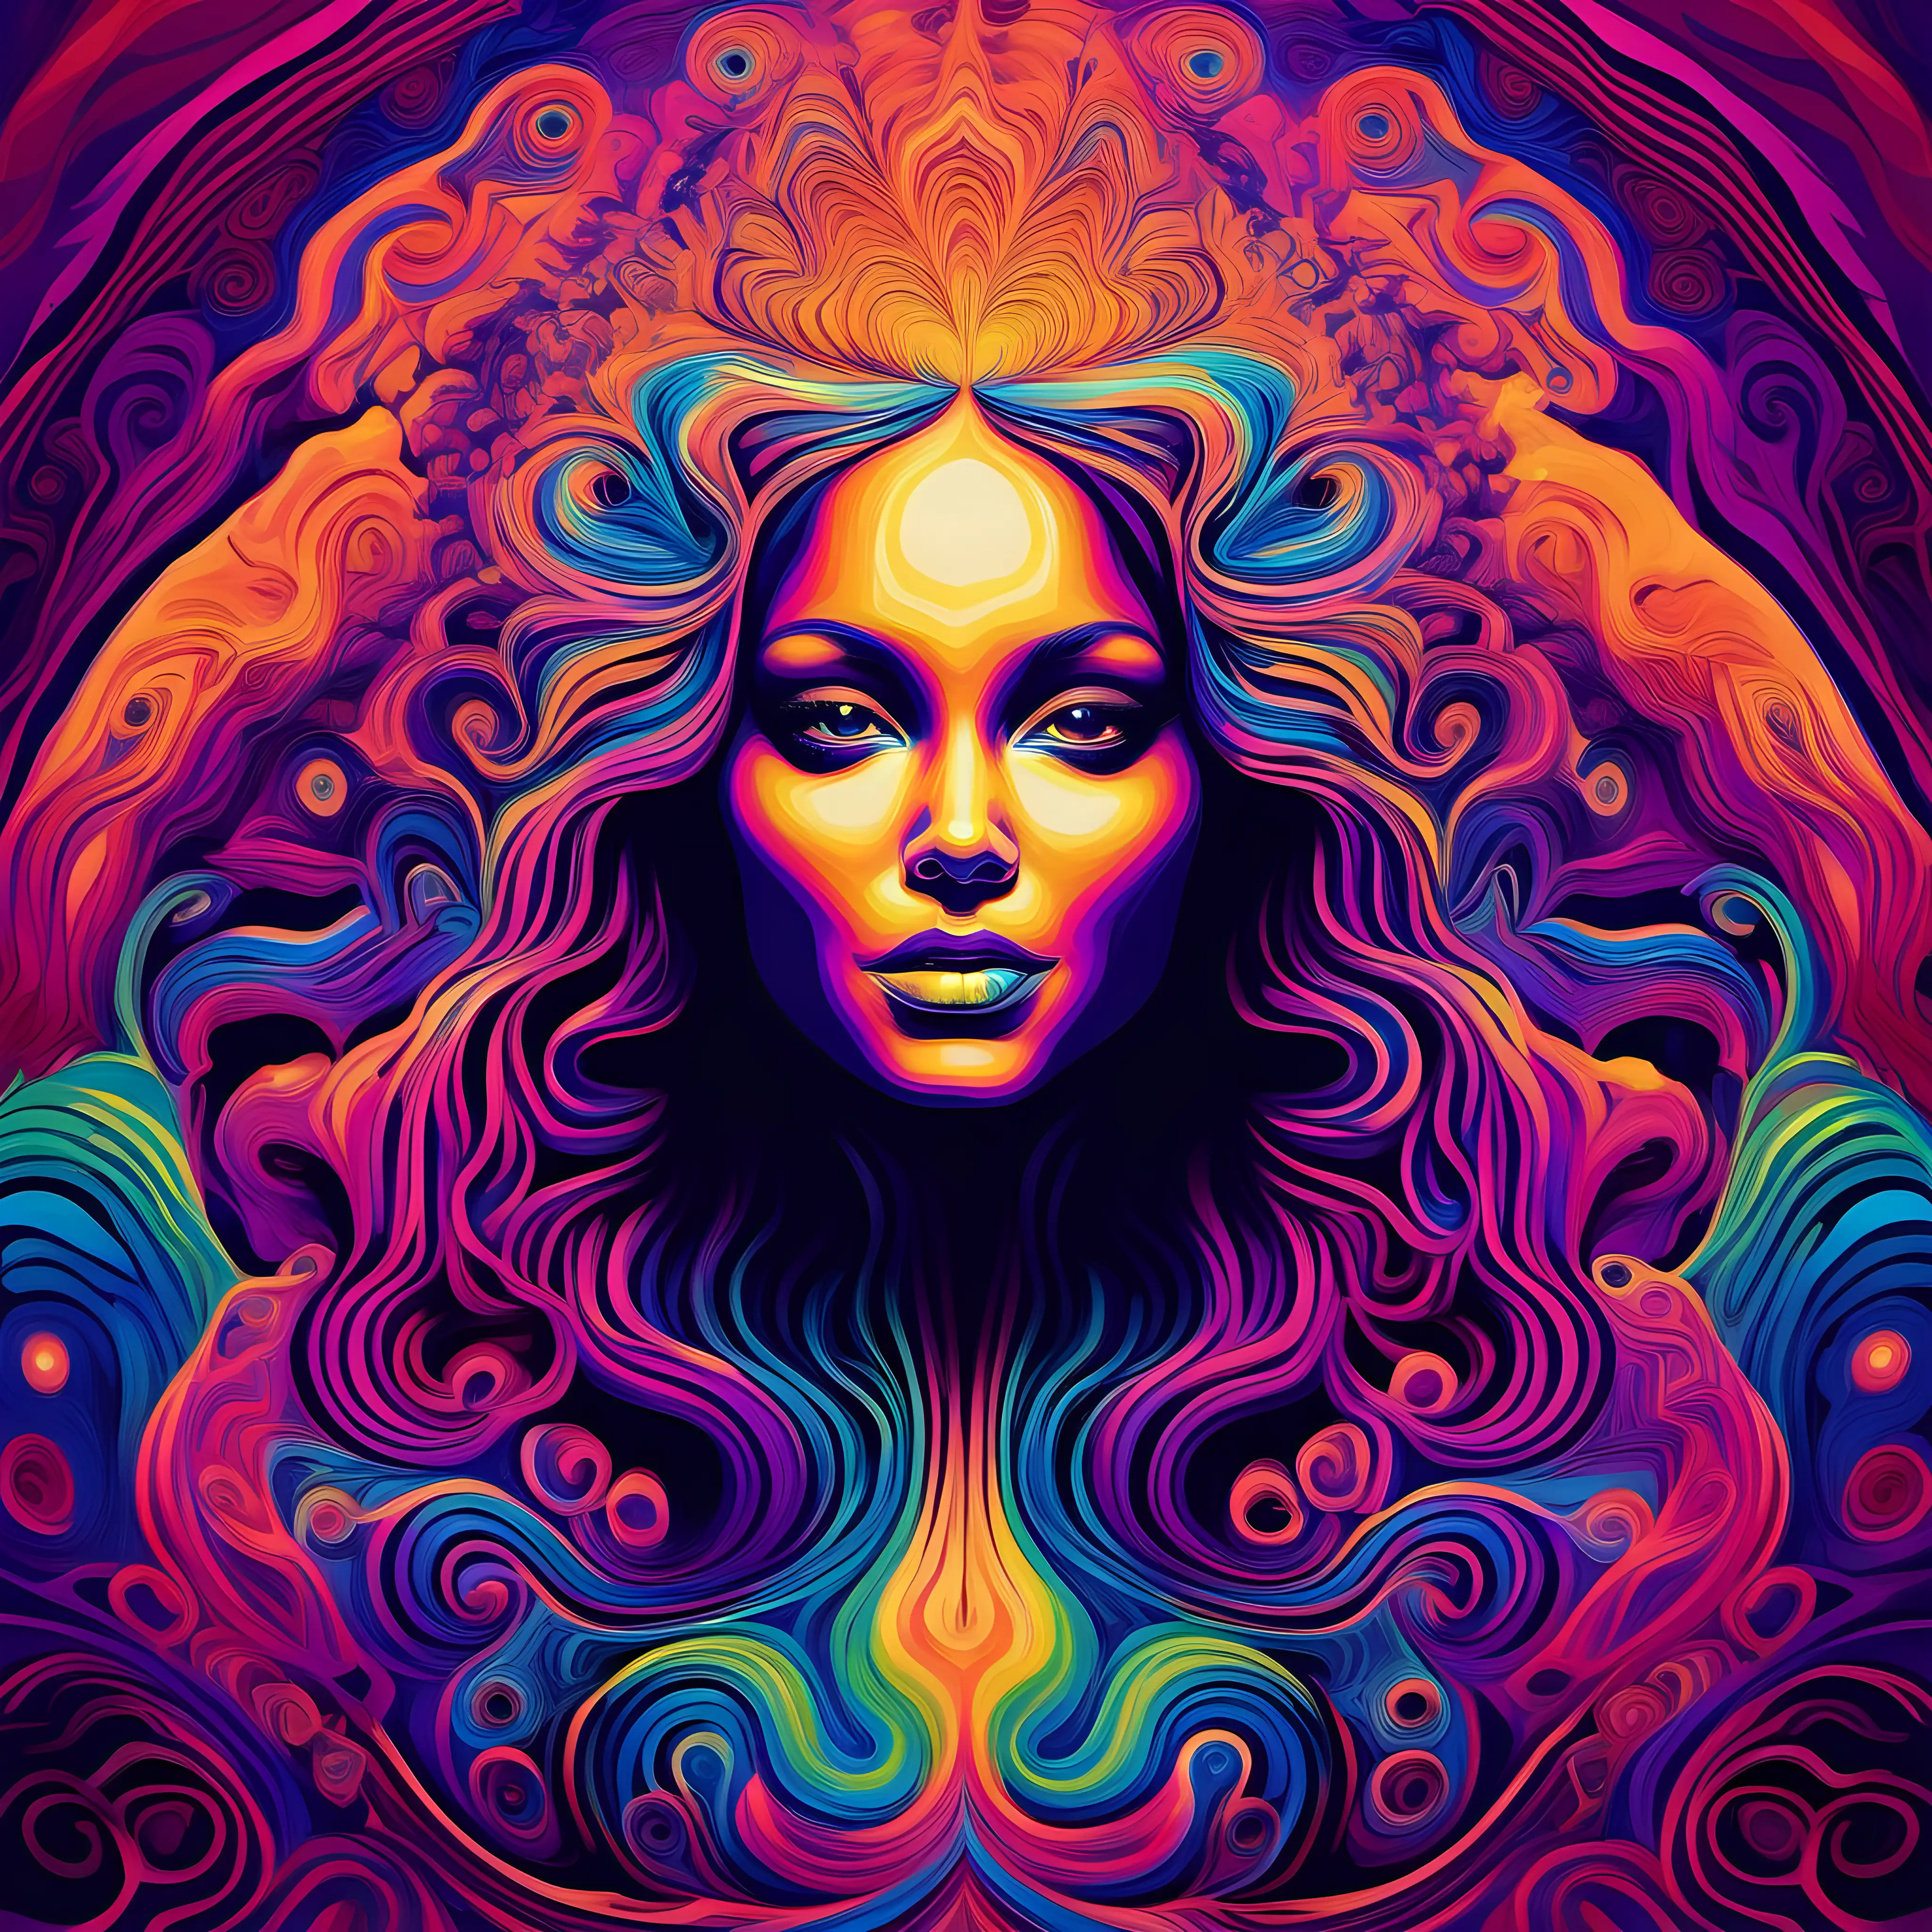 Mesmerizing Psychedelic Art Surreal Woman in Abstract Vibrancy